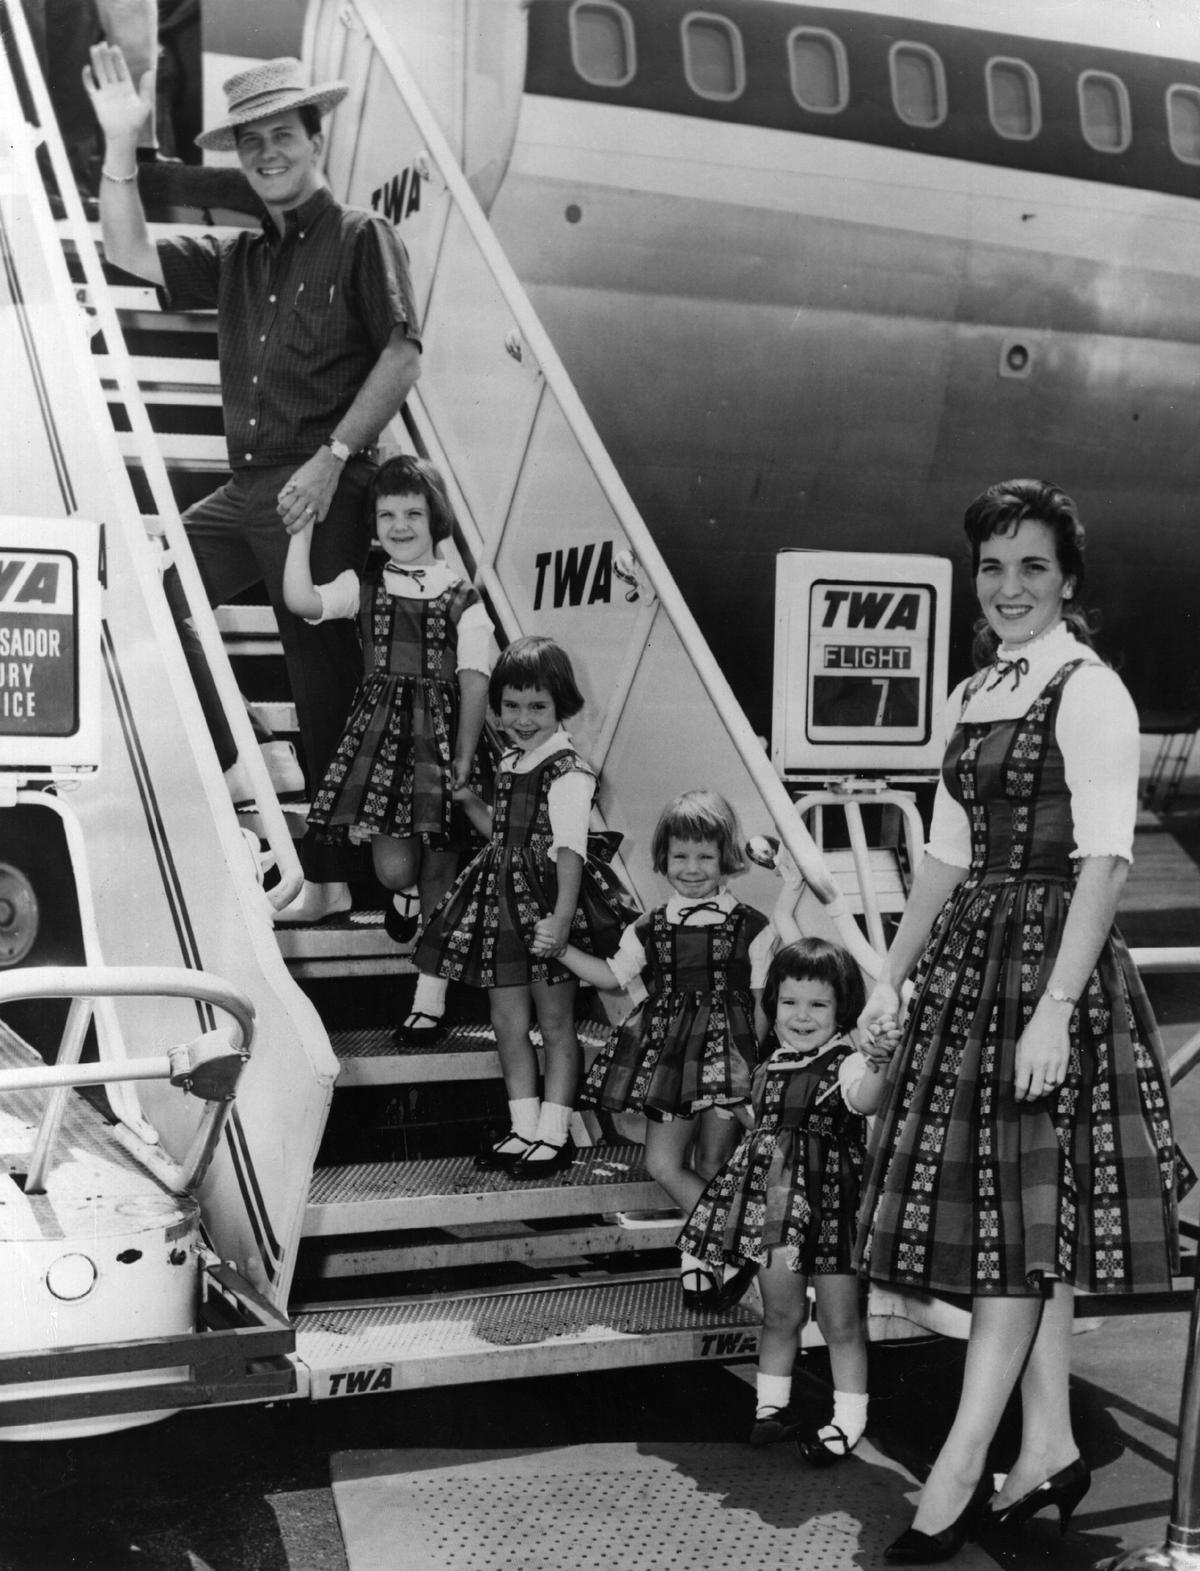 Popular American singer Pat Boone with his wife, Shirley, and their four daughters boarding an aeroplane at New York, bound for their permanent home of Los Angeles. (Keystone/Getty Images)